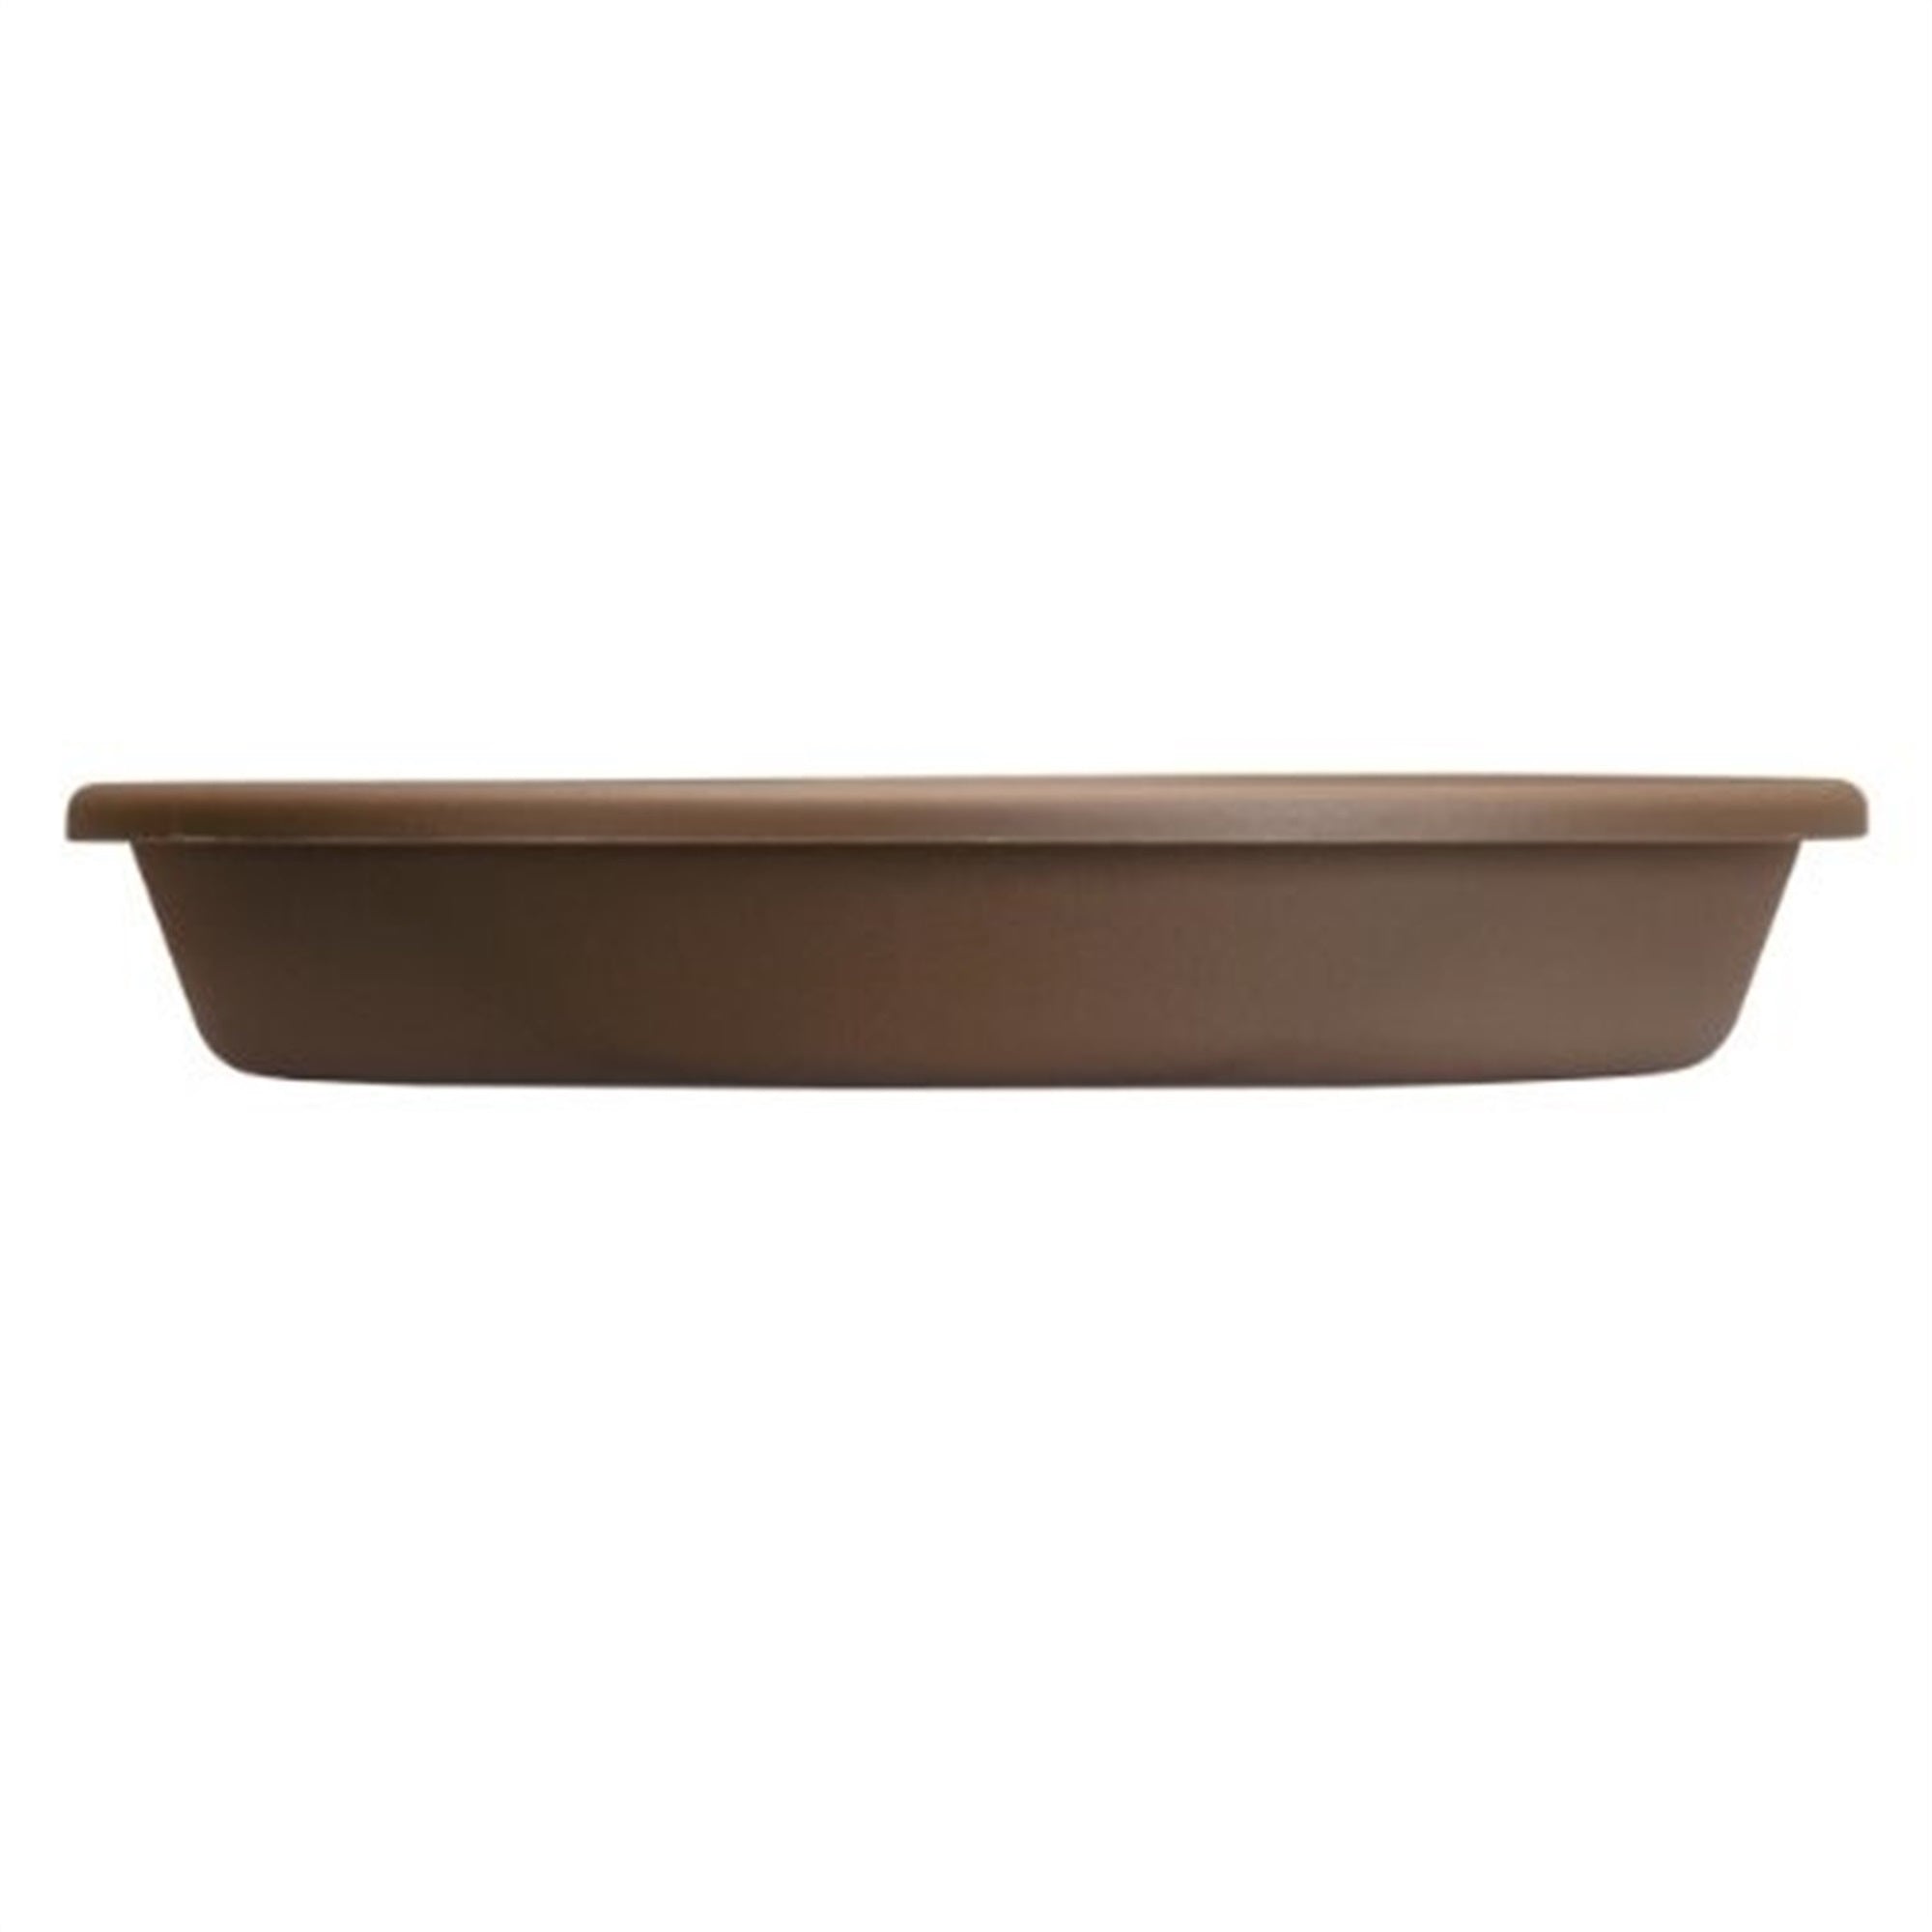 The HC Companies Classic Plastic Saucer for 8-Inch Classic Pot, Chocolate, 8"